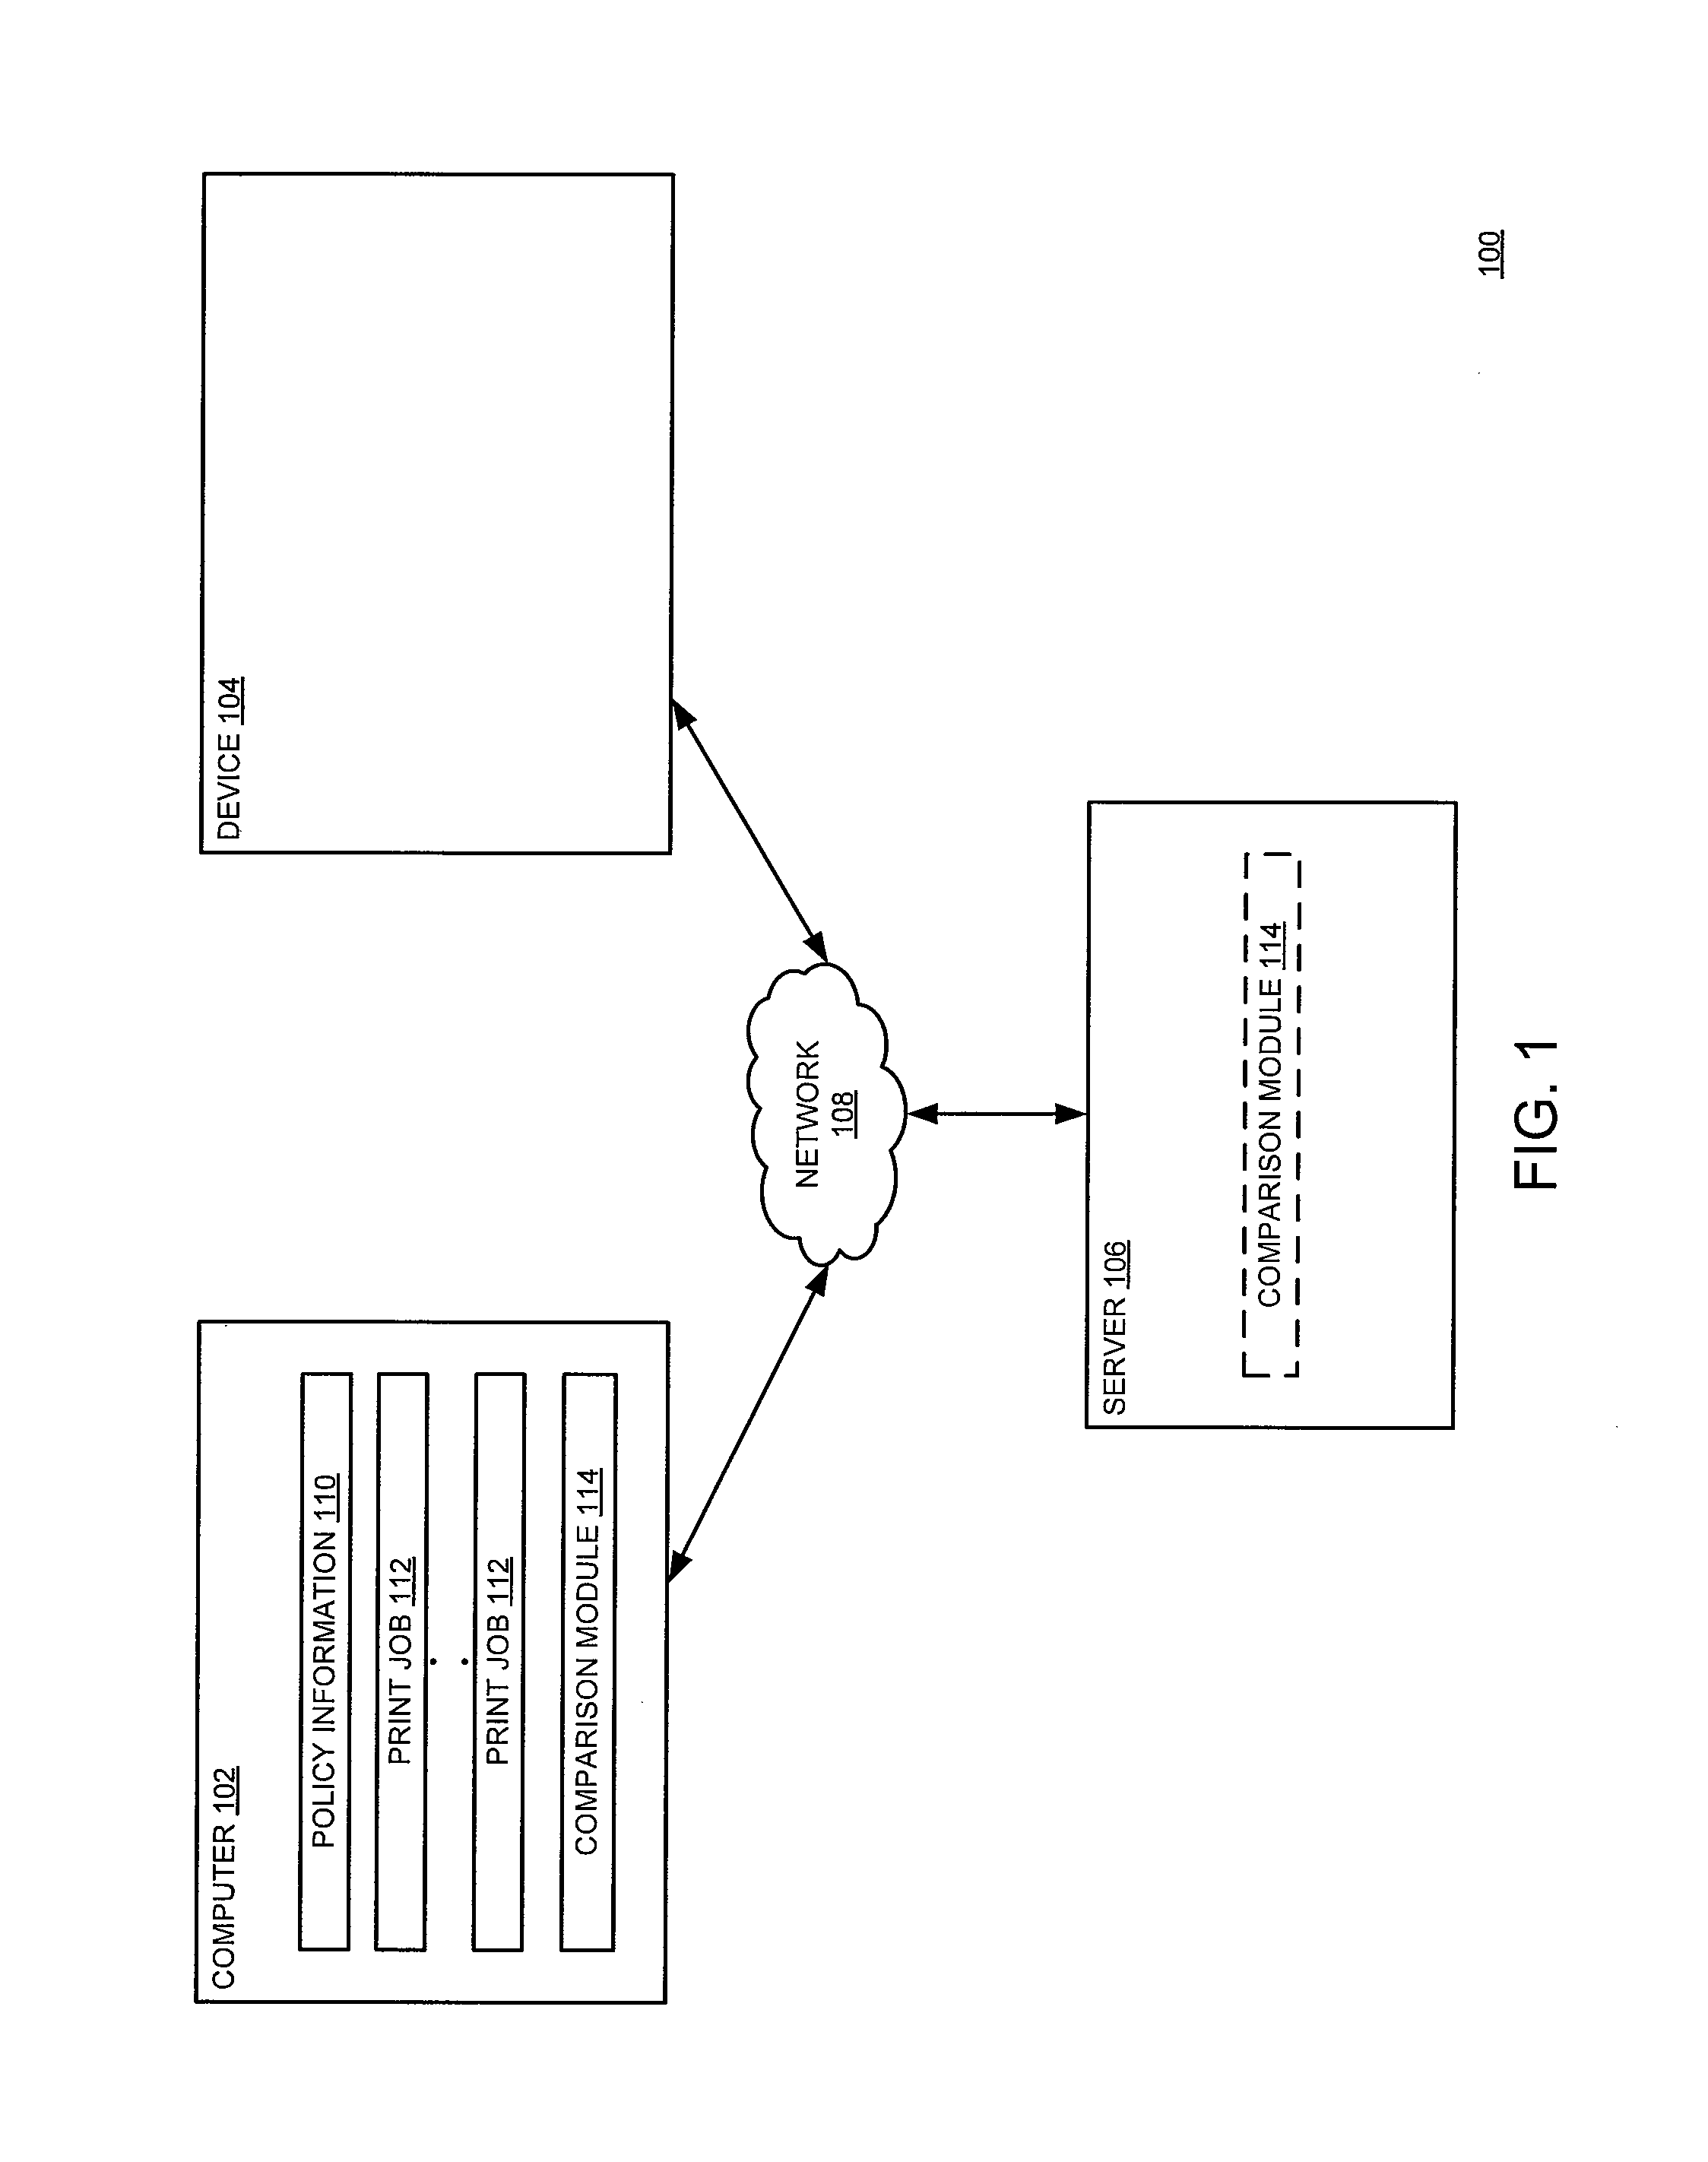 Method and apparatus for verifying print jobs to prevent confidential data loss